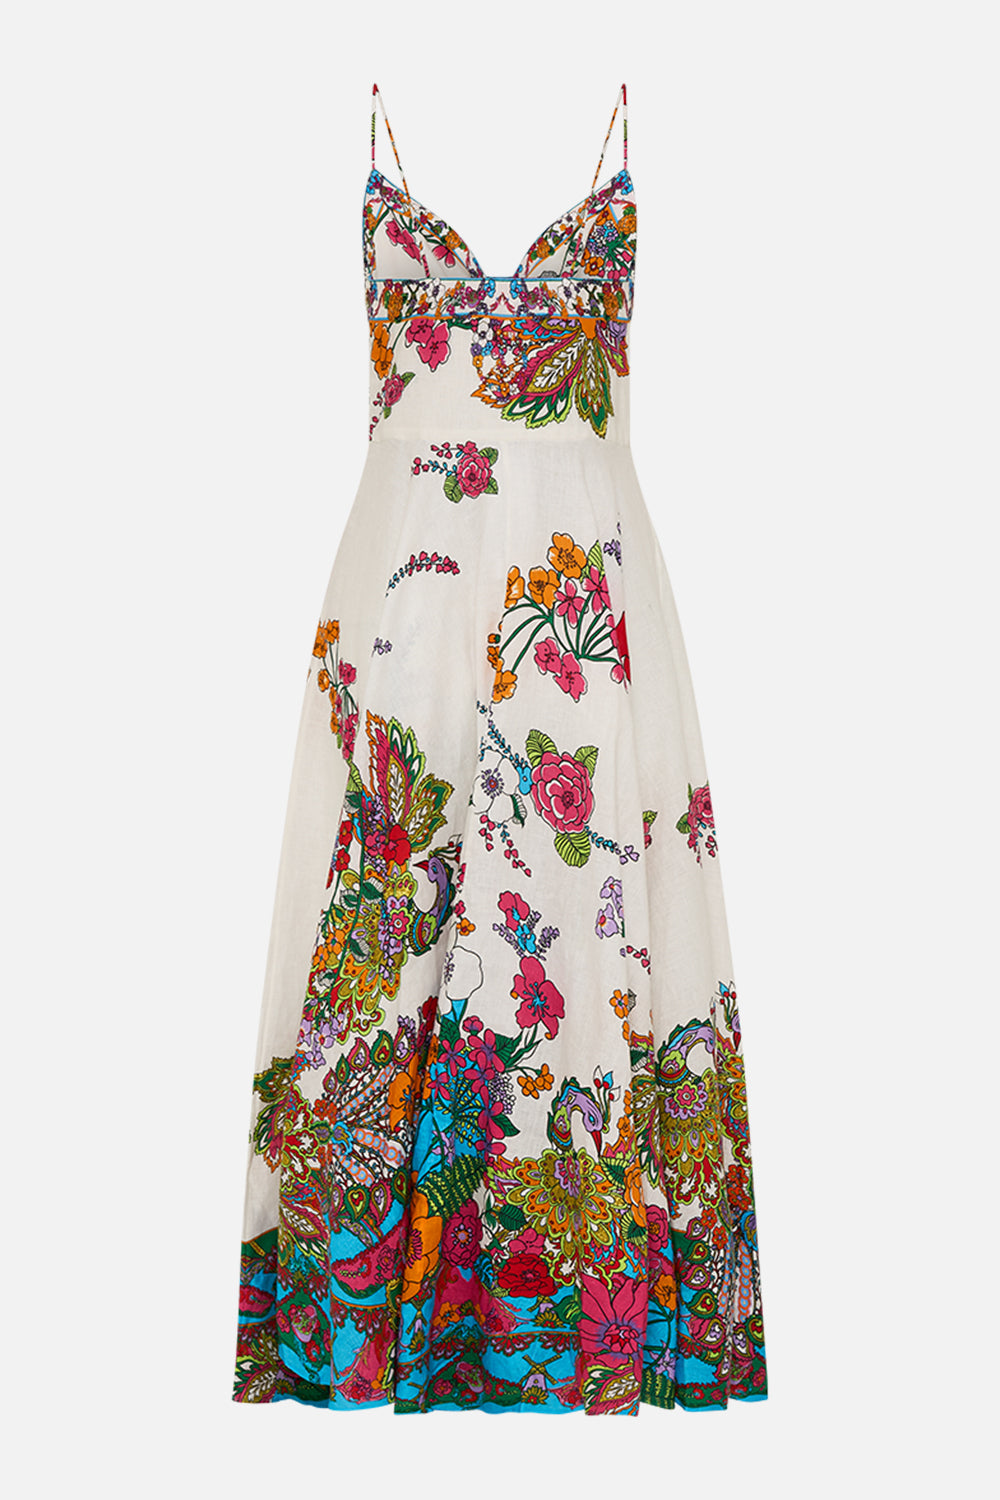 CAMILLA retro floral long dress with tie-front in Cosmic Prairie print.